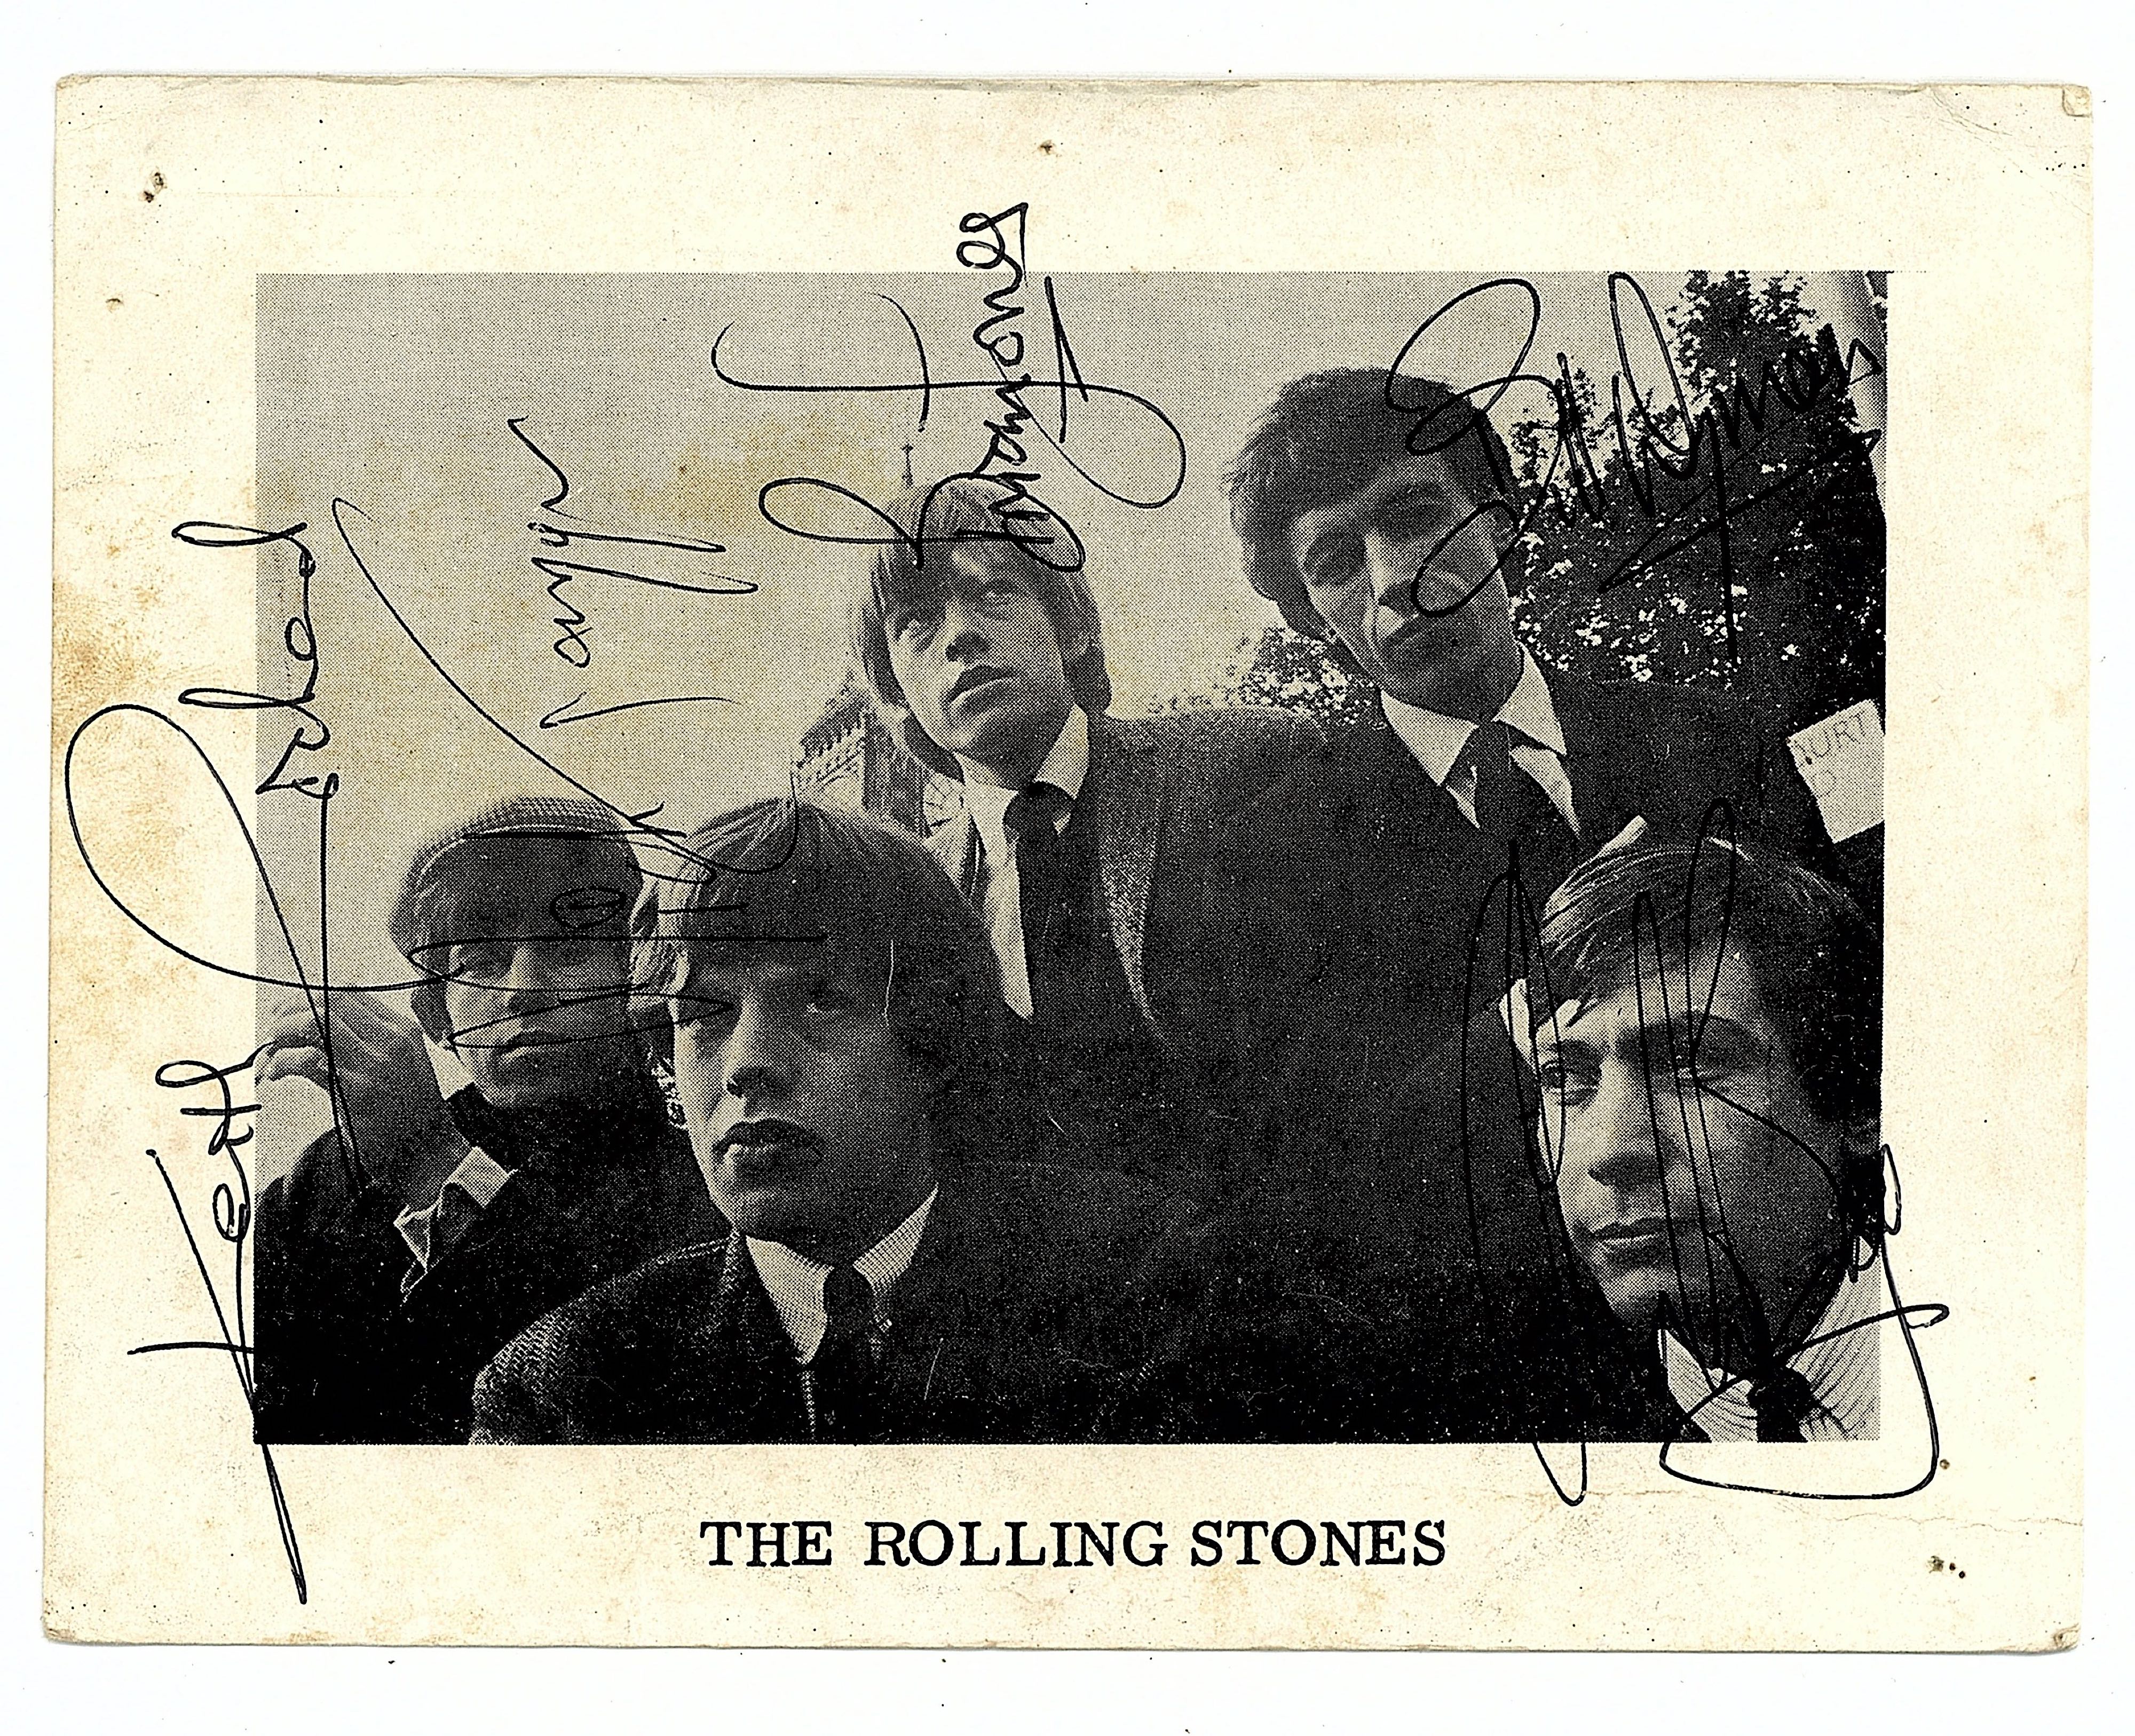 Autograph Album.- Incl. the Rolling Stones Autograph album with two Decca promo cards signed by